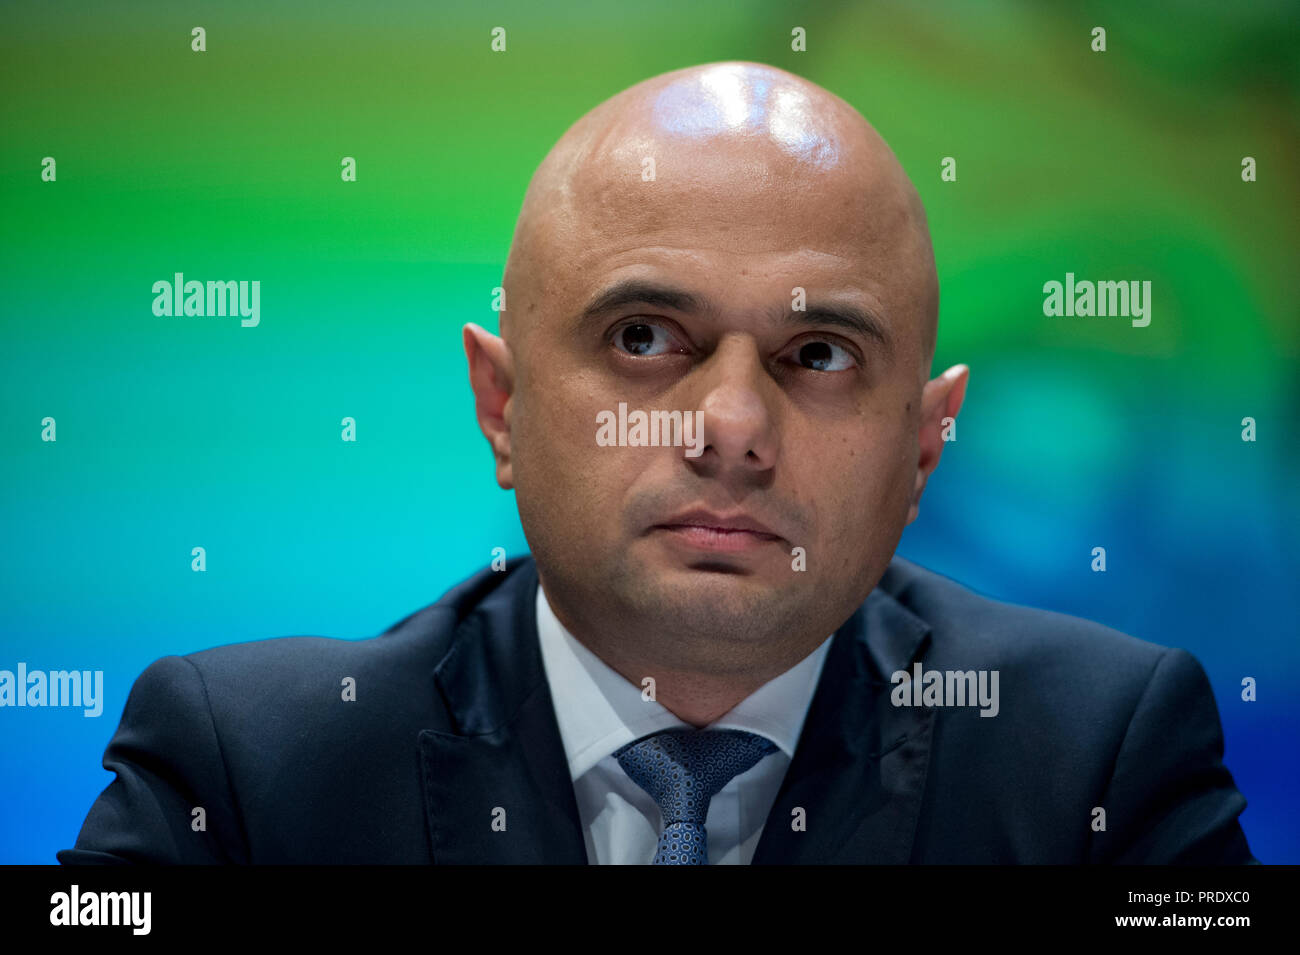 Birmingham, UK. 1st October 2018. Sajid Javid, Secretary of State for the Home Department and Conservative MP for Bromsgrove, speaks during The Spectator and Sky fringe event titled How Open Is Britain?, at the Conservative Party Conference in Birmingham. © Russell Hart/Alamy Live News. Stock Photo